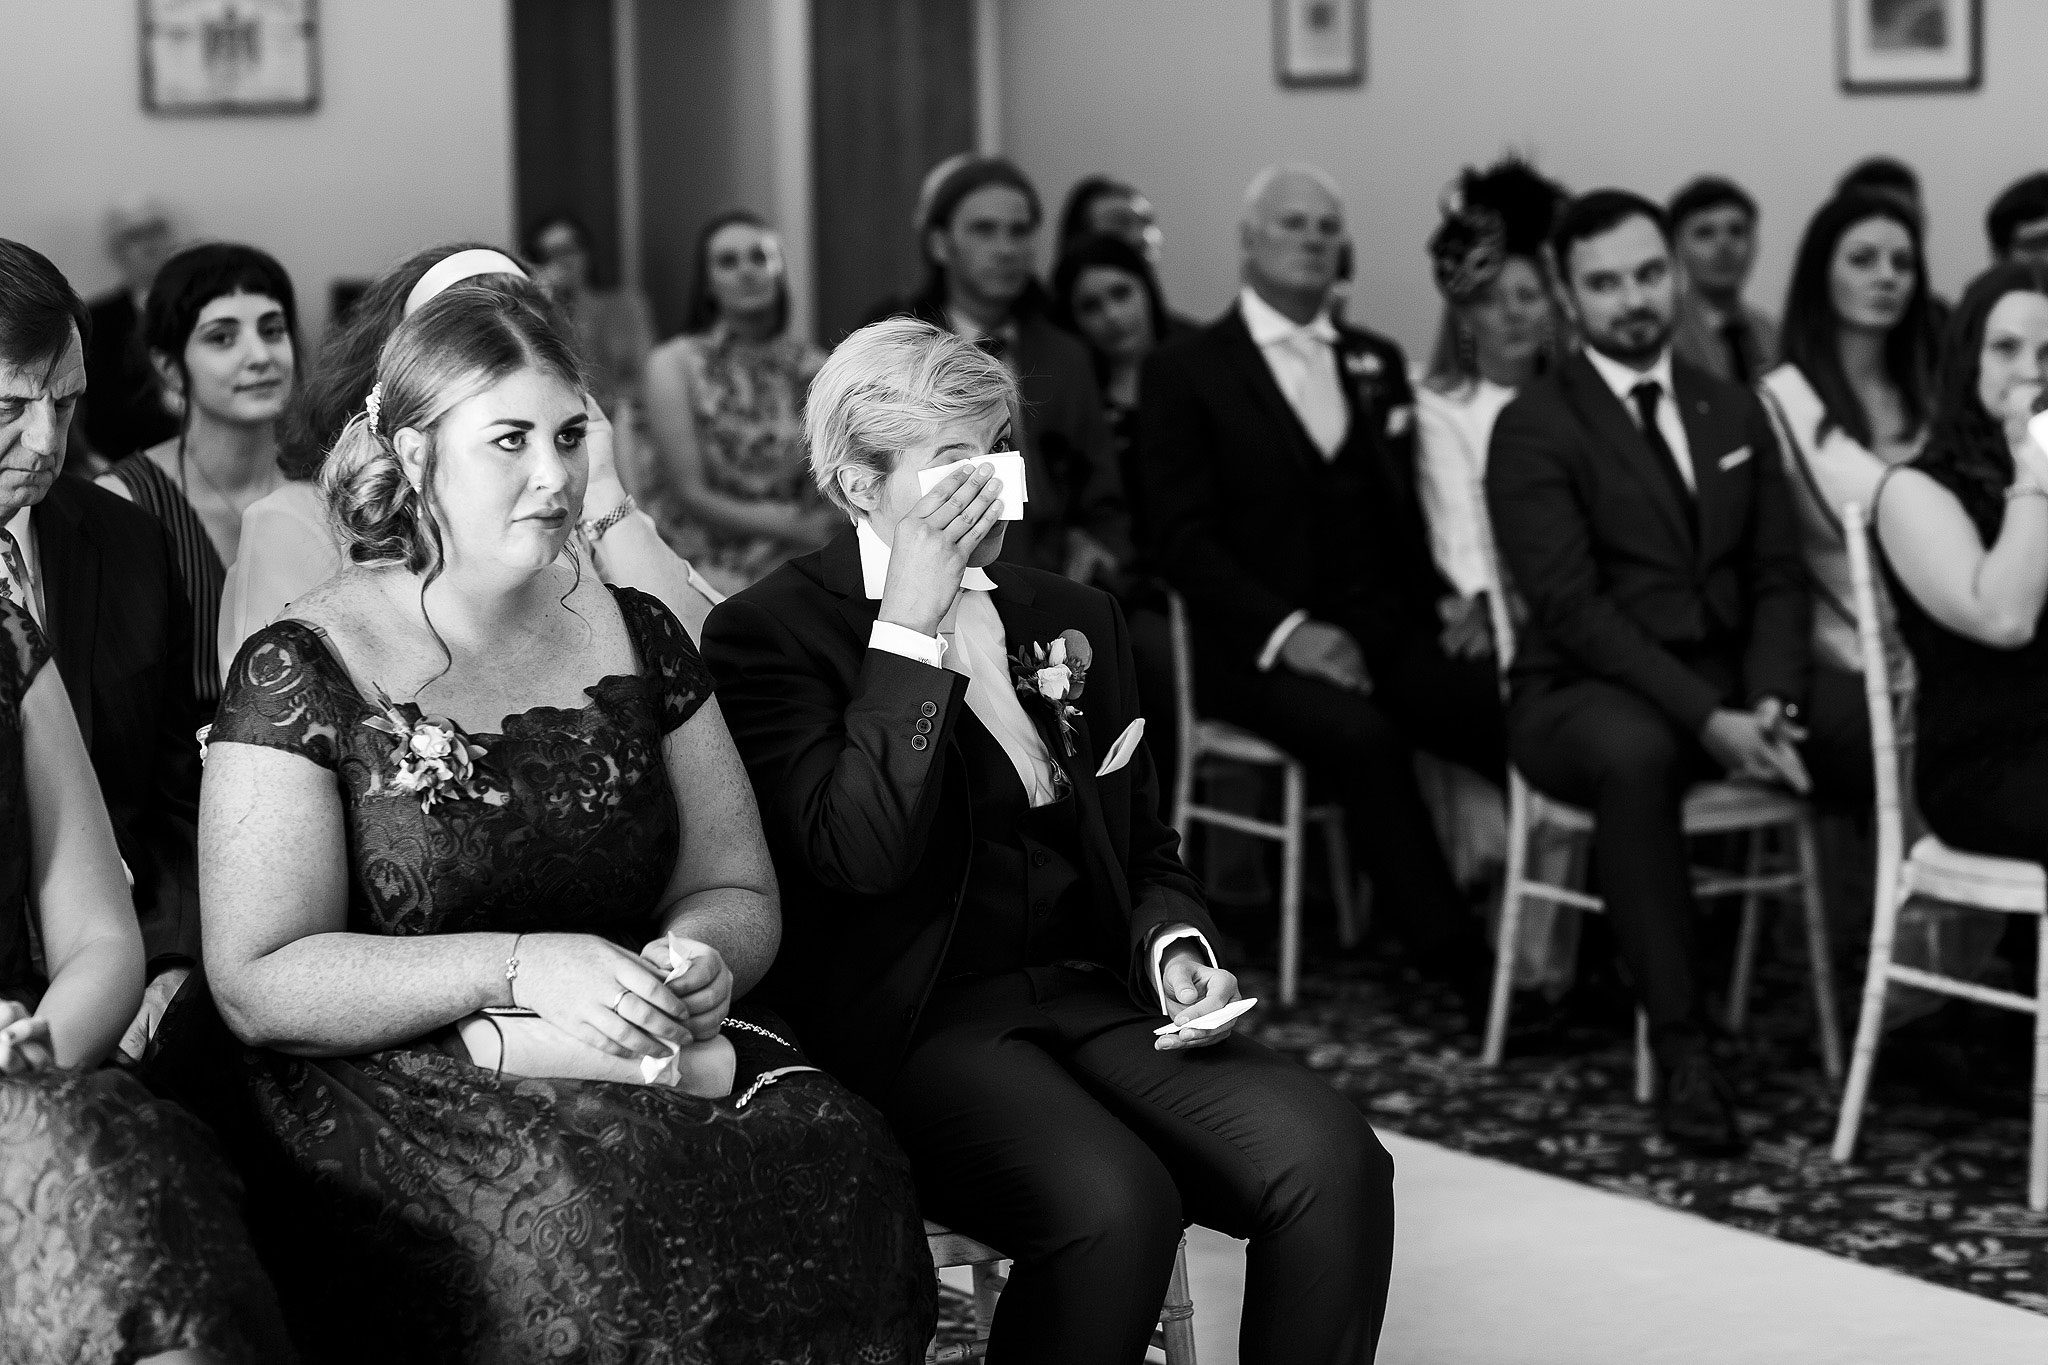 Emotional guests during wedding ceremony - The Villa at Wrea Green Wedding Photography - Toni Darcy Photography